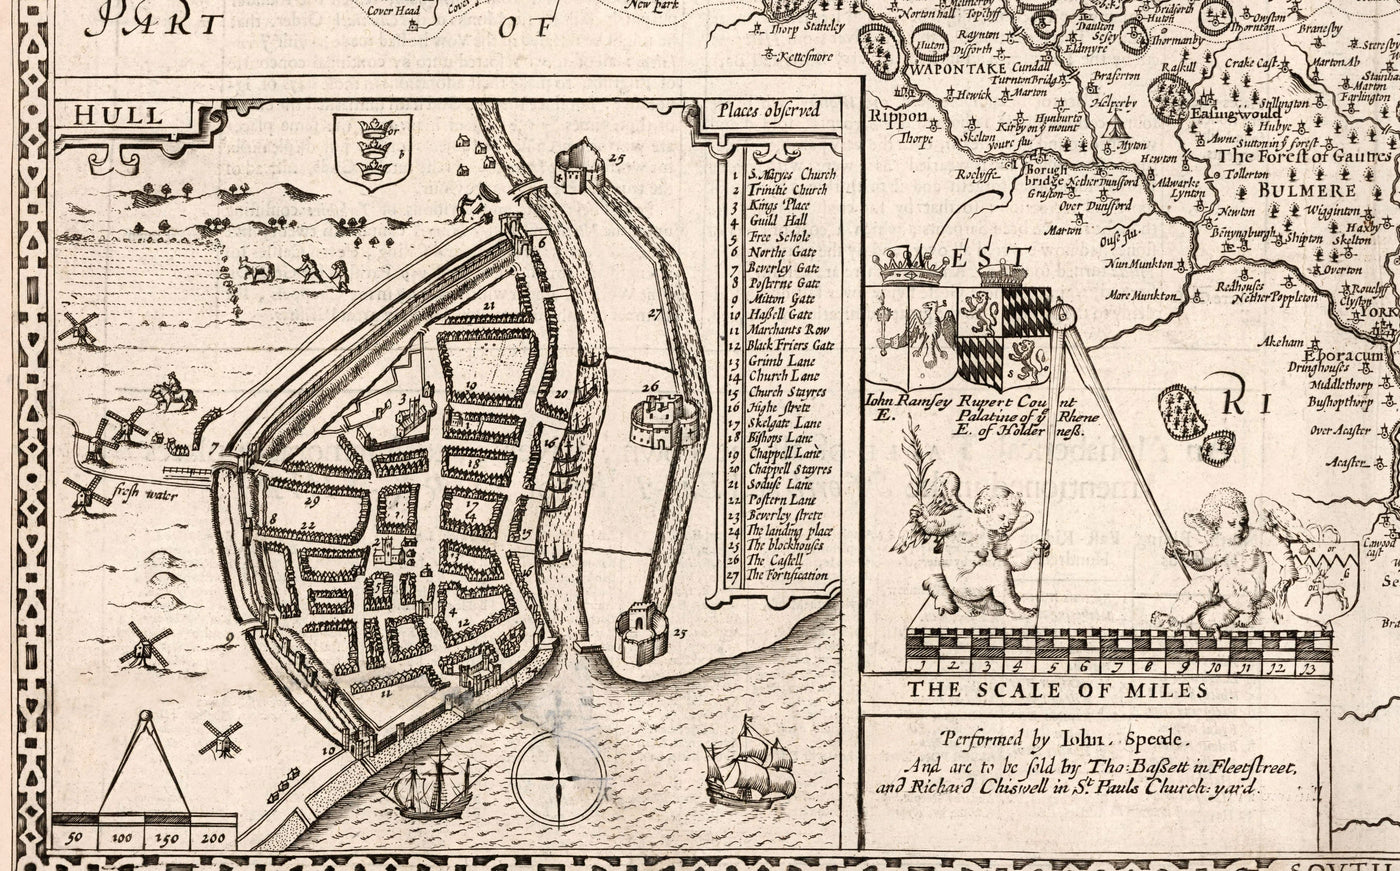 Old Map of North and East Yorkshire, 1611 by John Speed - Hull, York, Middlesbrough, Harrogate